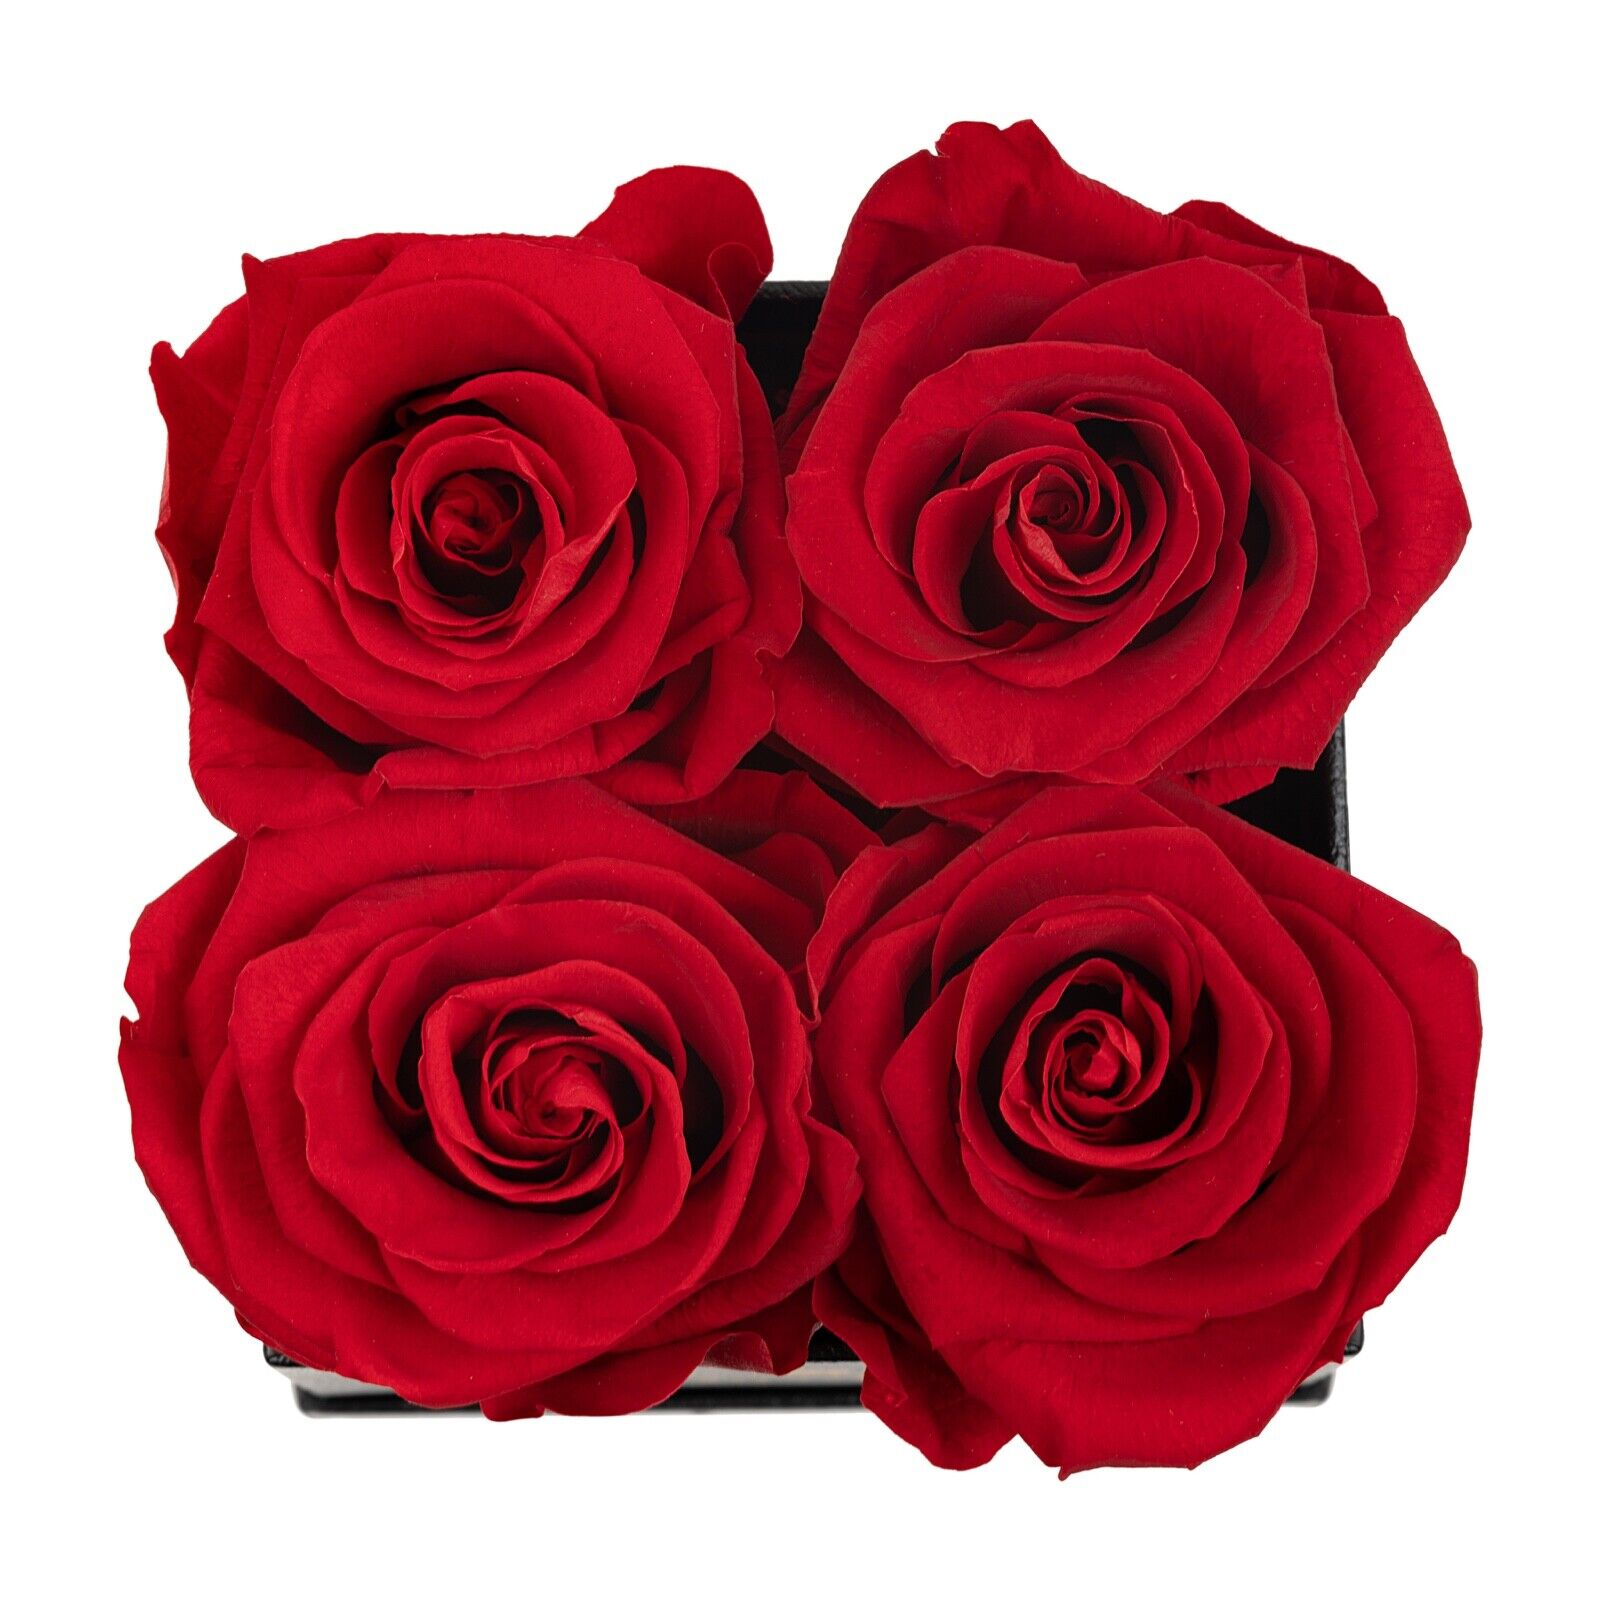 Preserved  Real Roses| Roses that last 1 year o more| Roses in a Box. O'Hara des Fleur - фотография #2